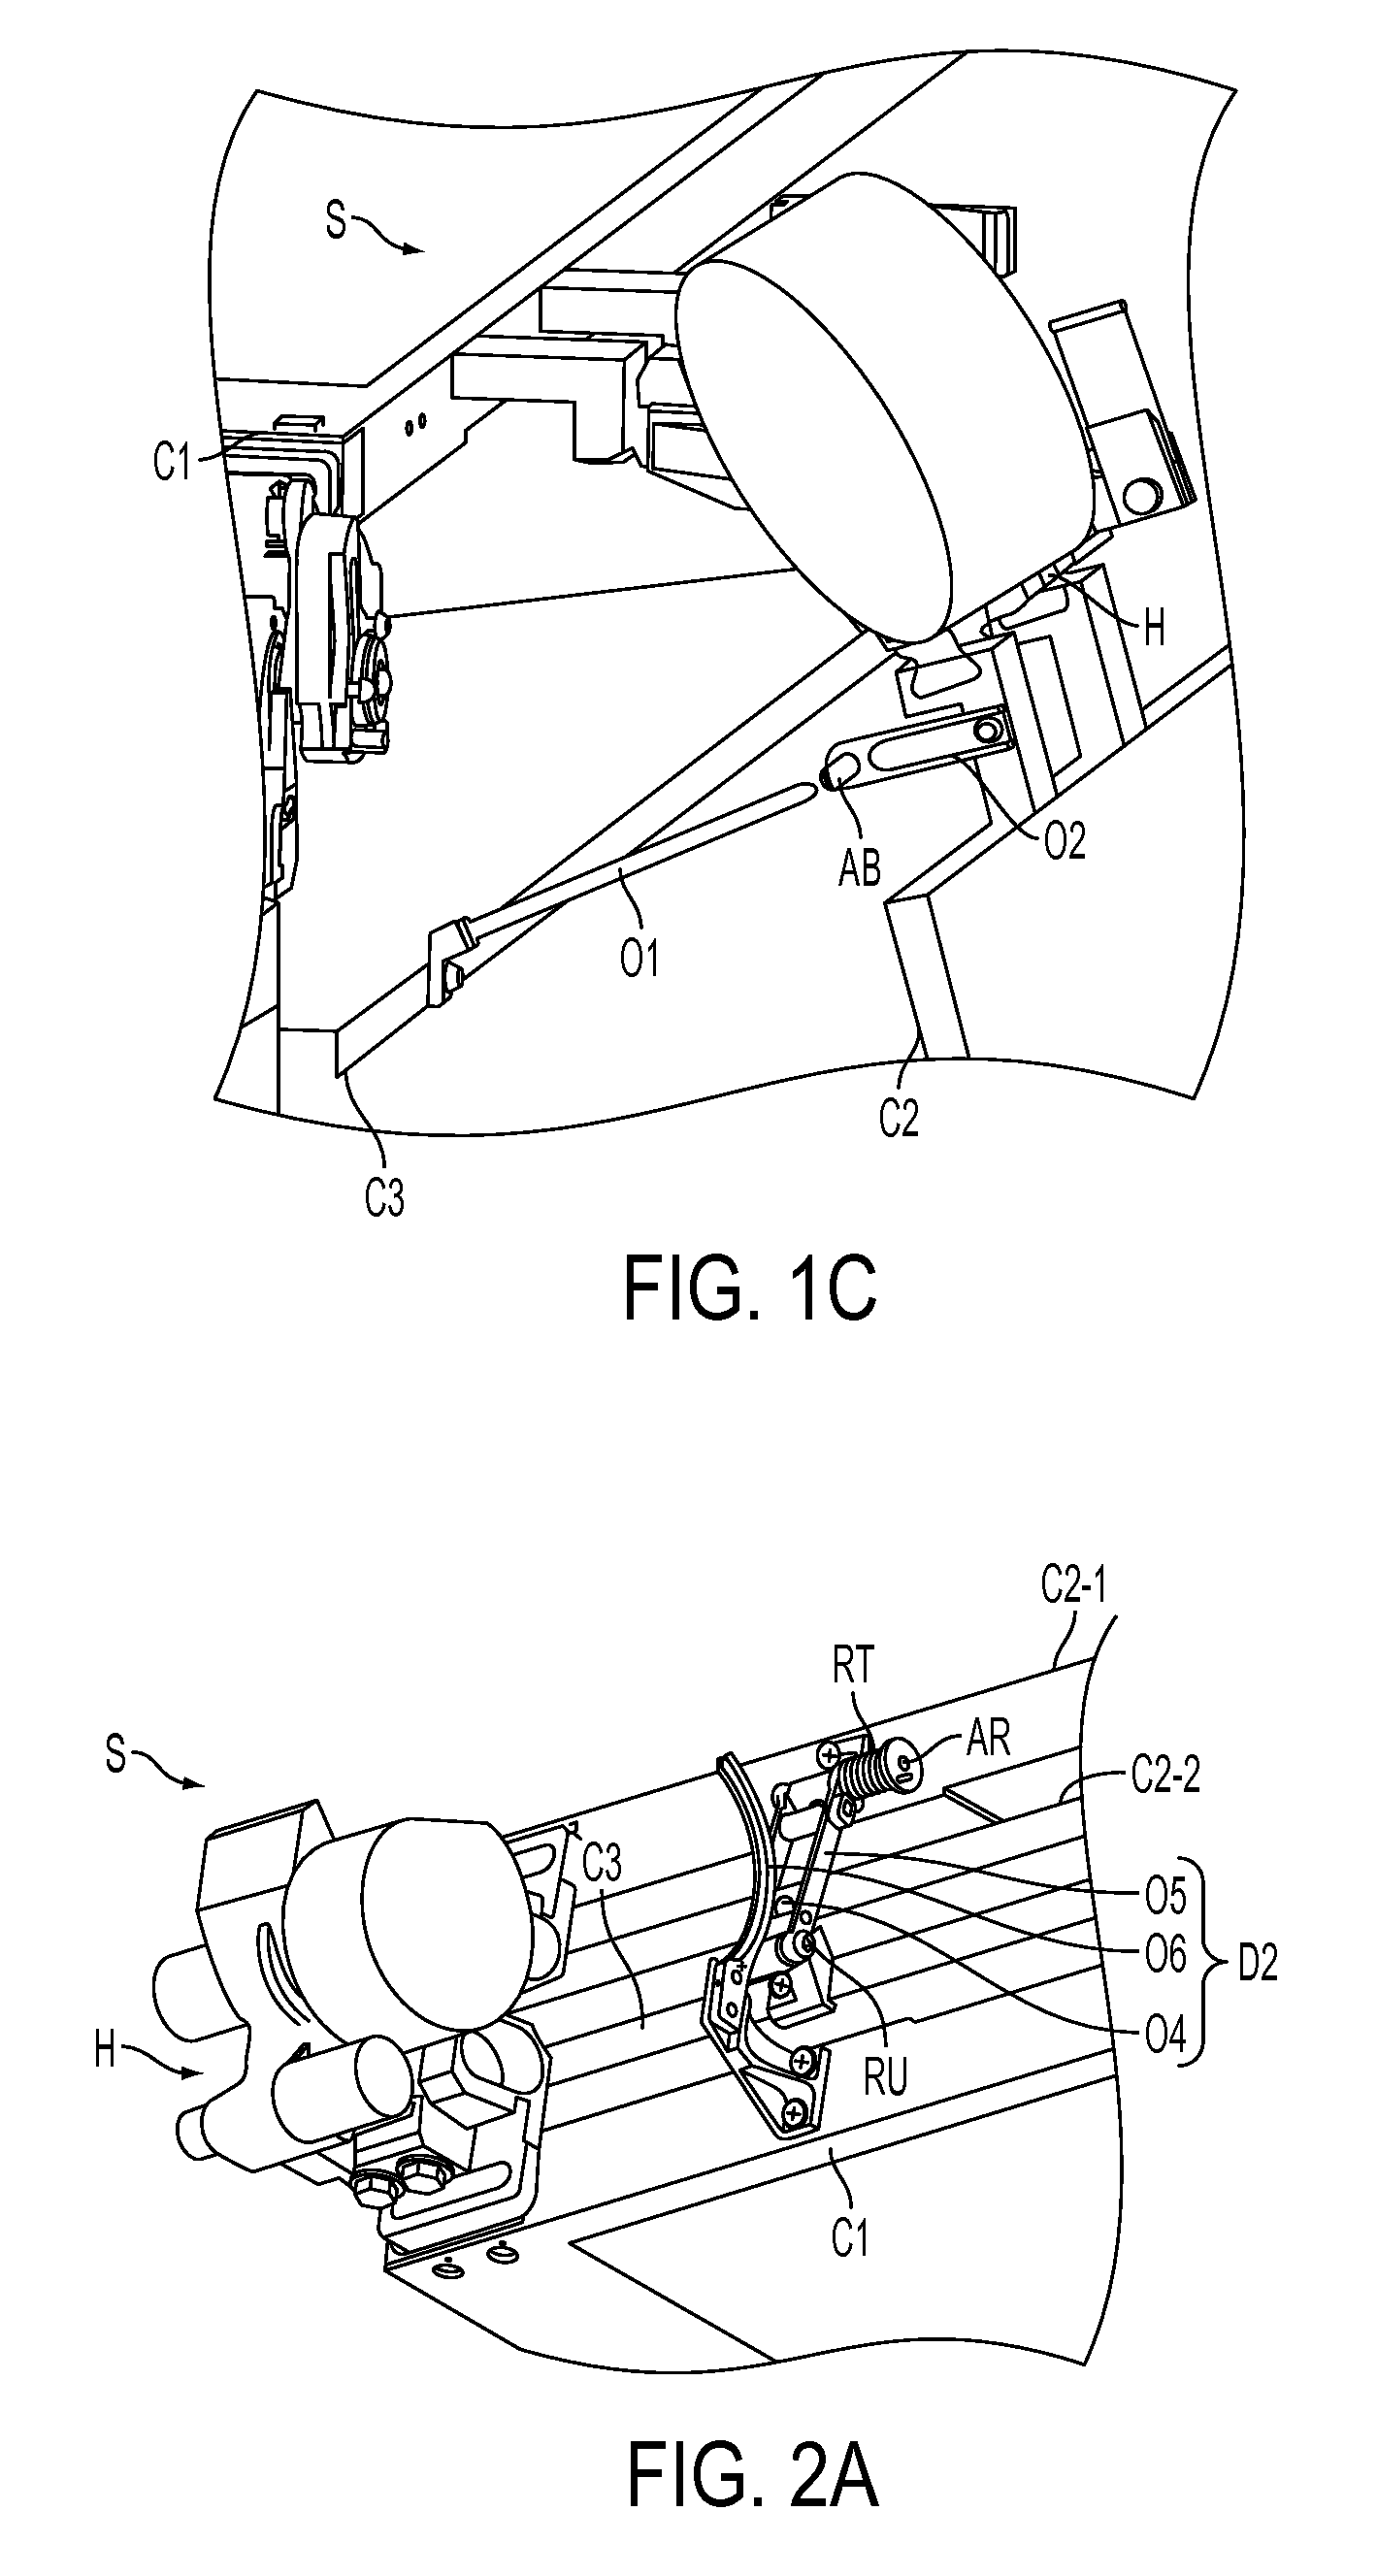 Sequencing device for deploying a structure as a function of the kinematics of one mobile body thereof